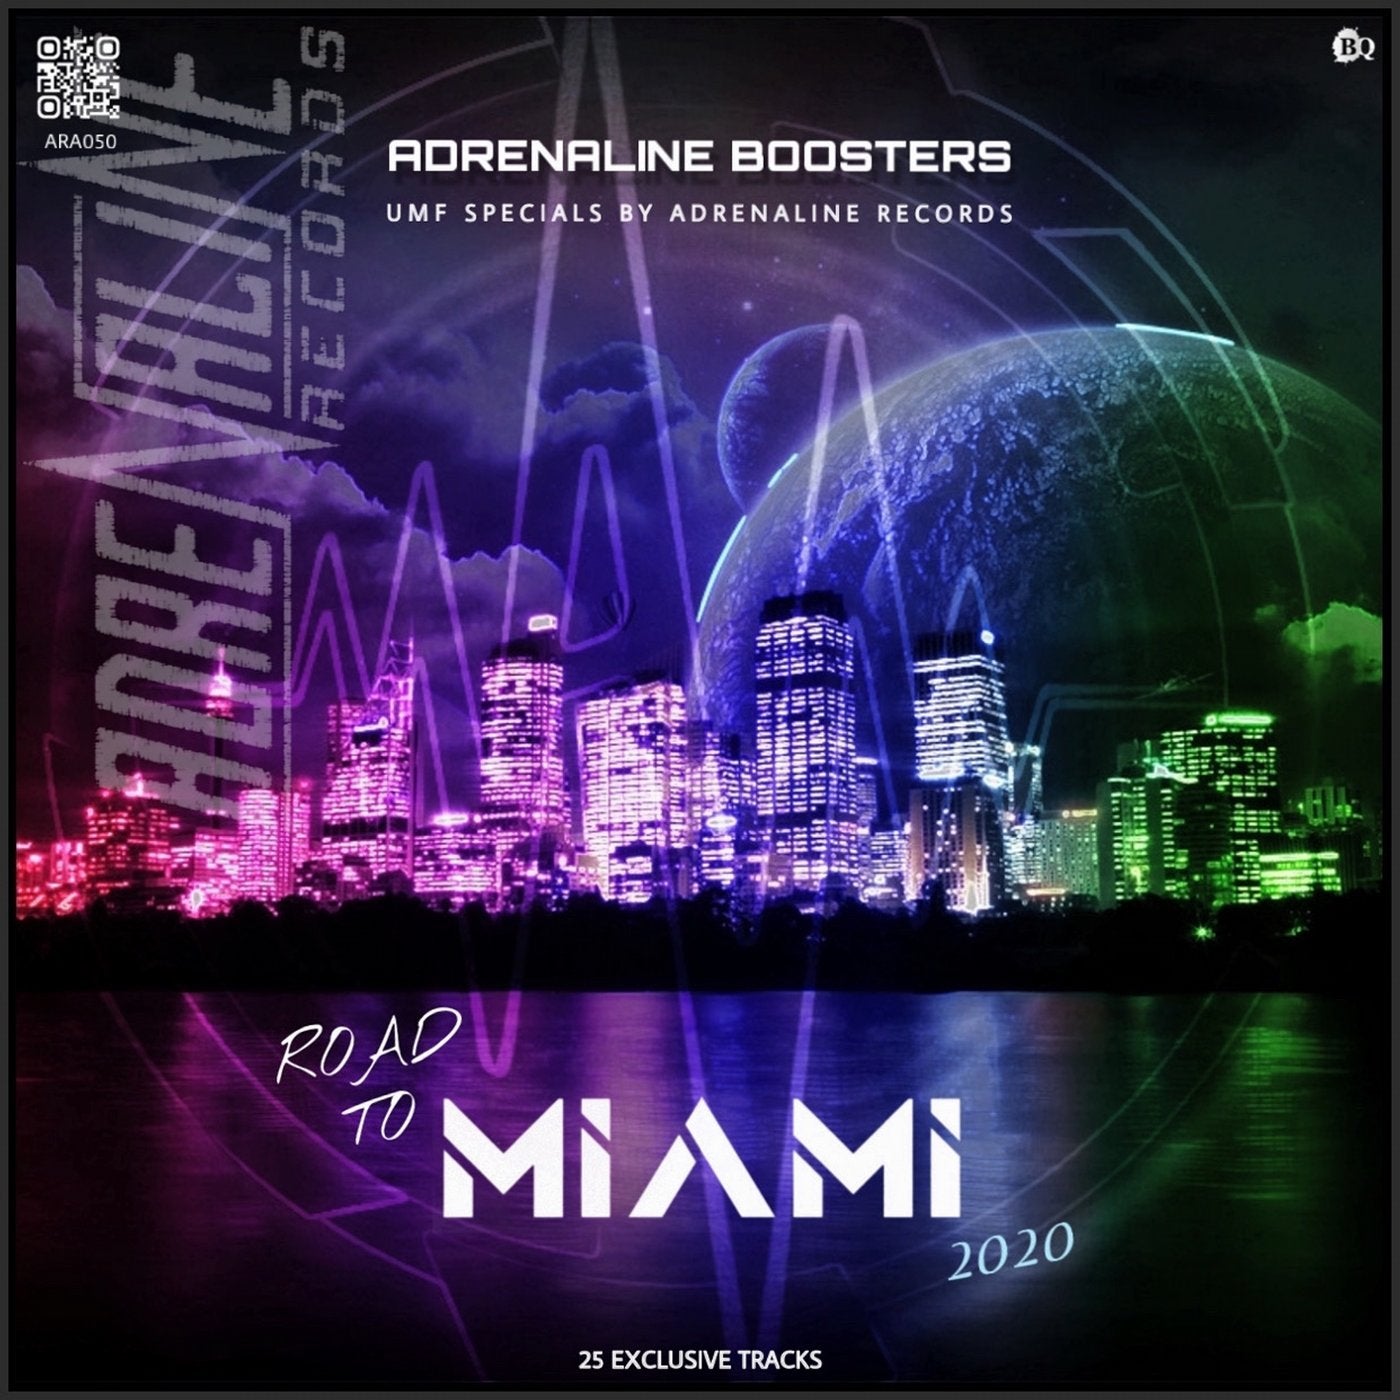 Adrenaline Boosters - Road To Miami 2020